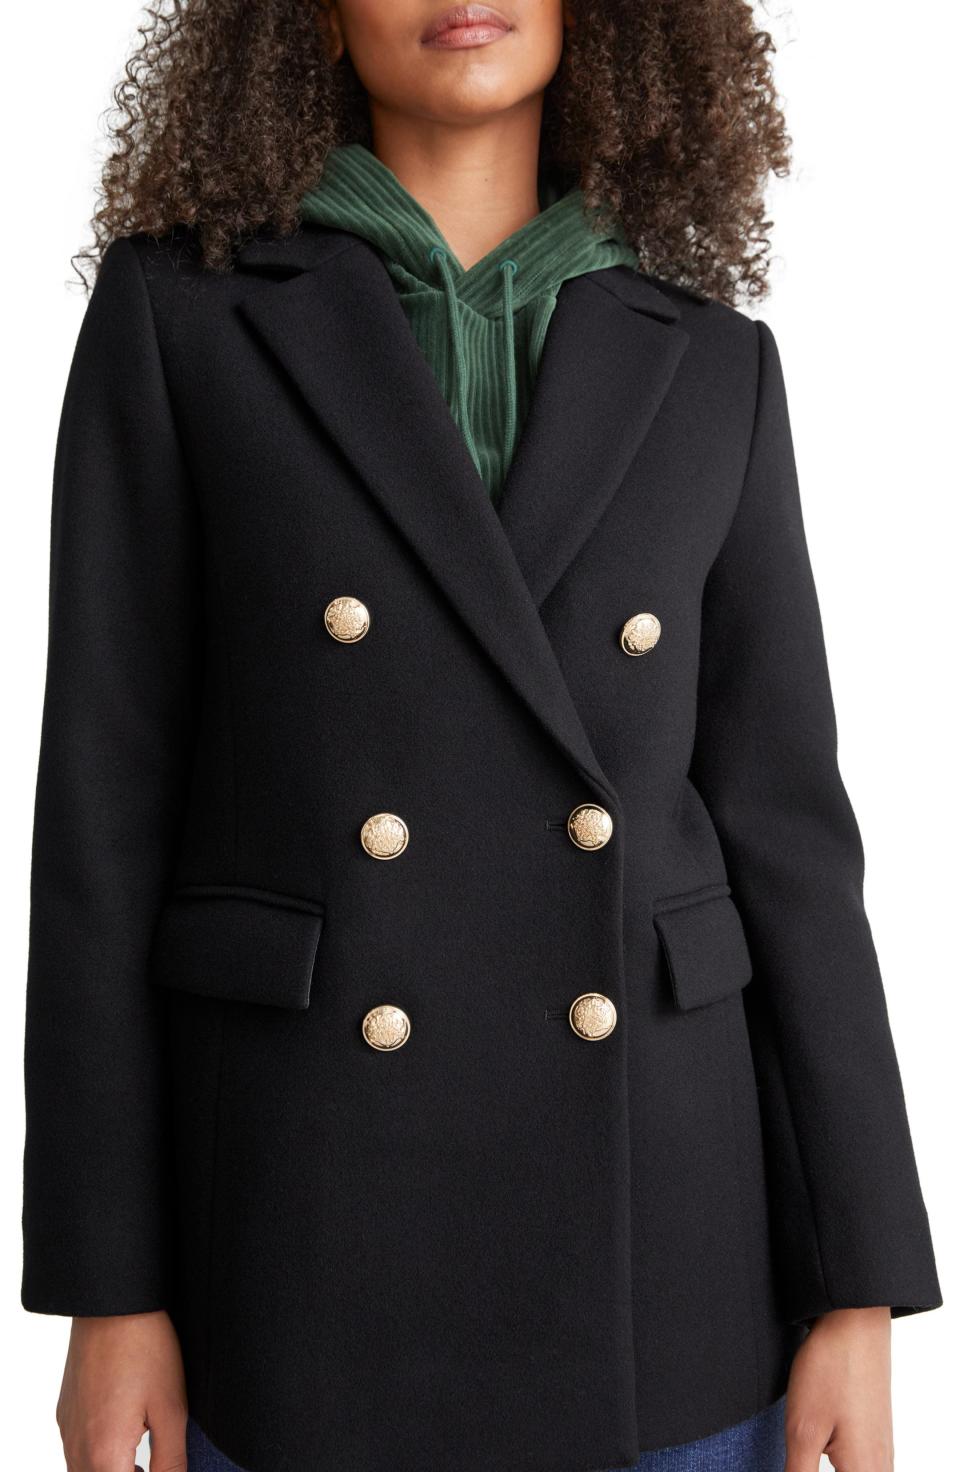 11) Recycled Wool Blend Coat